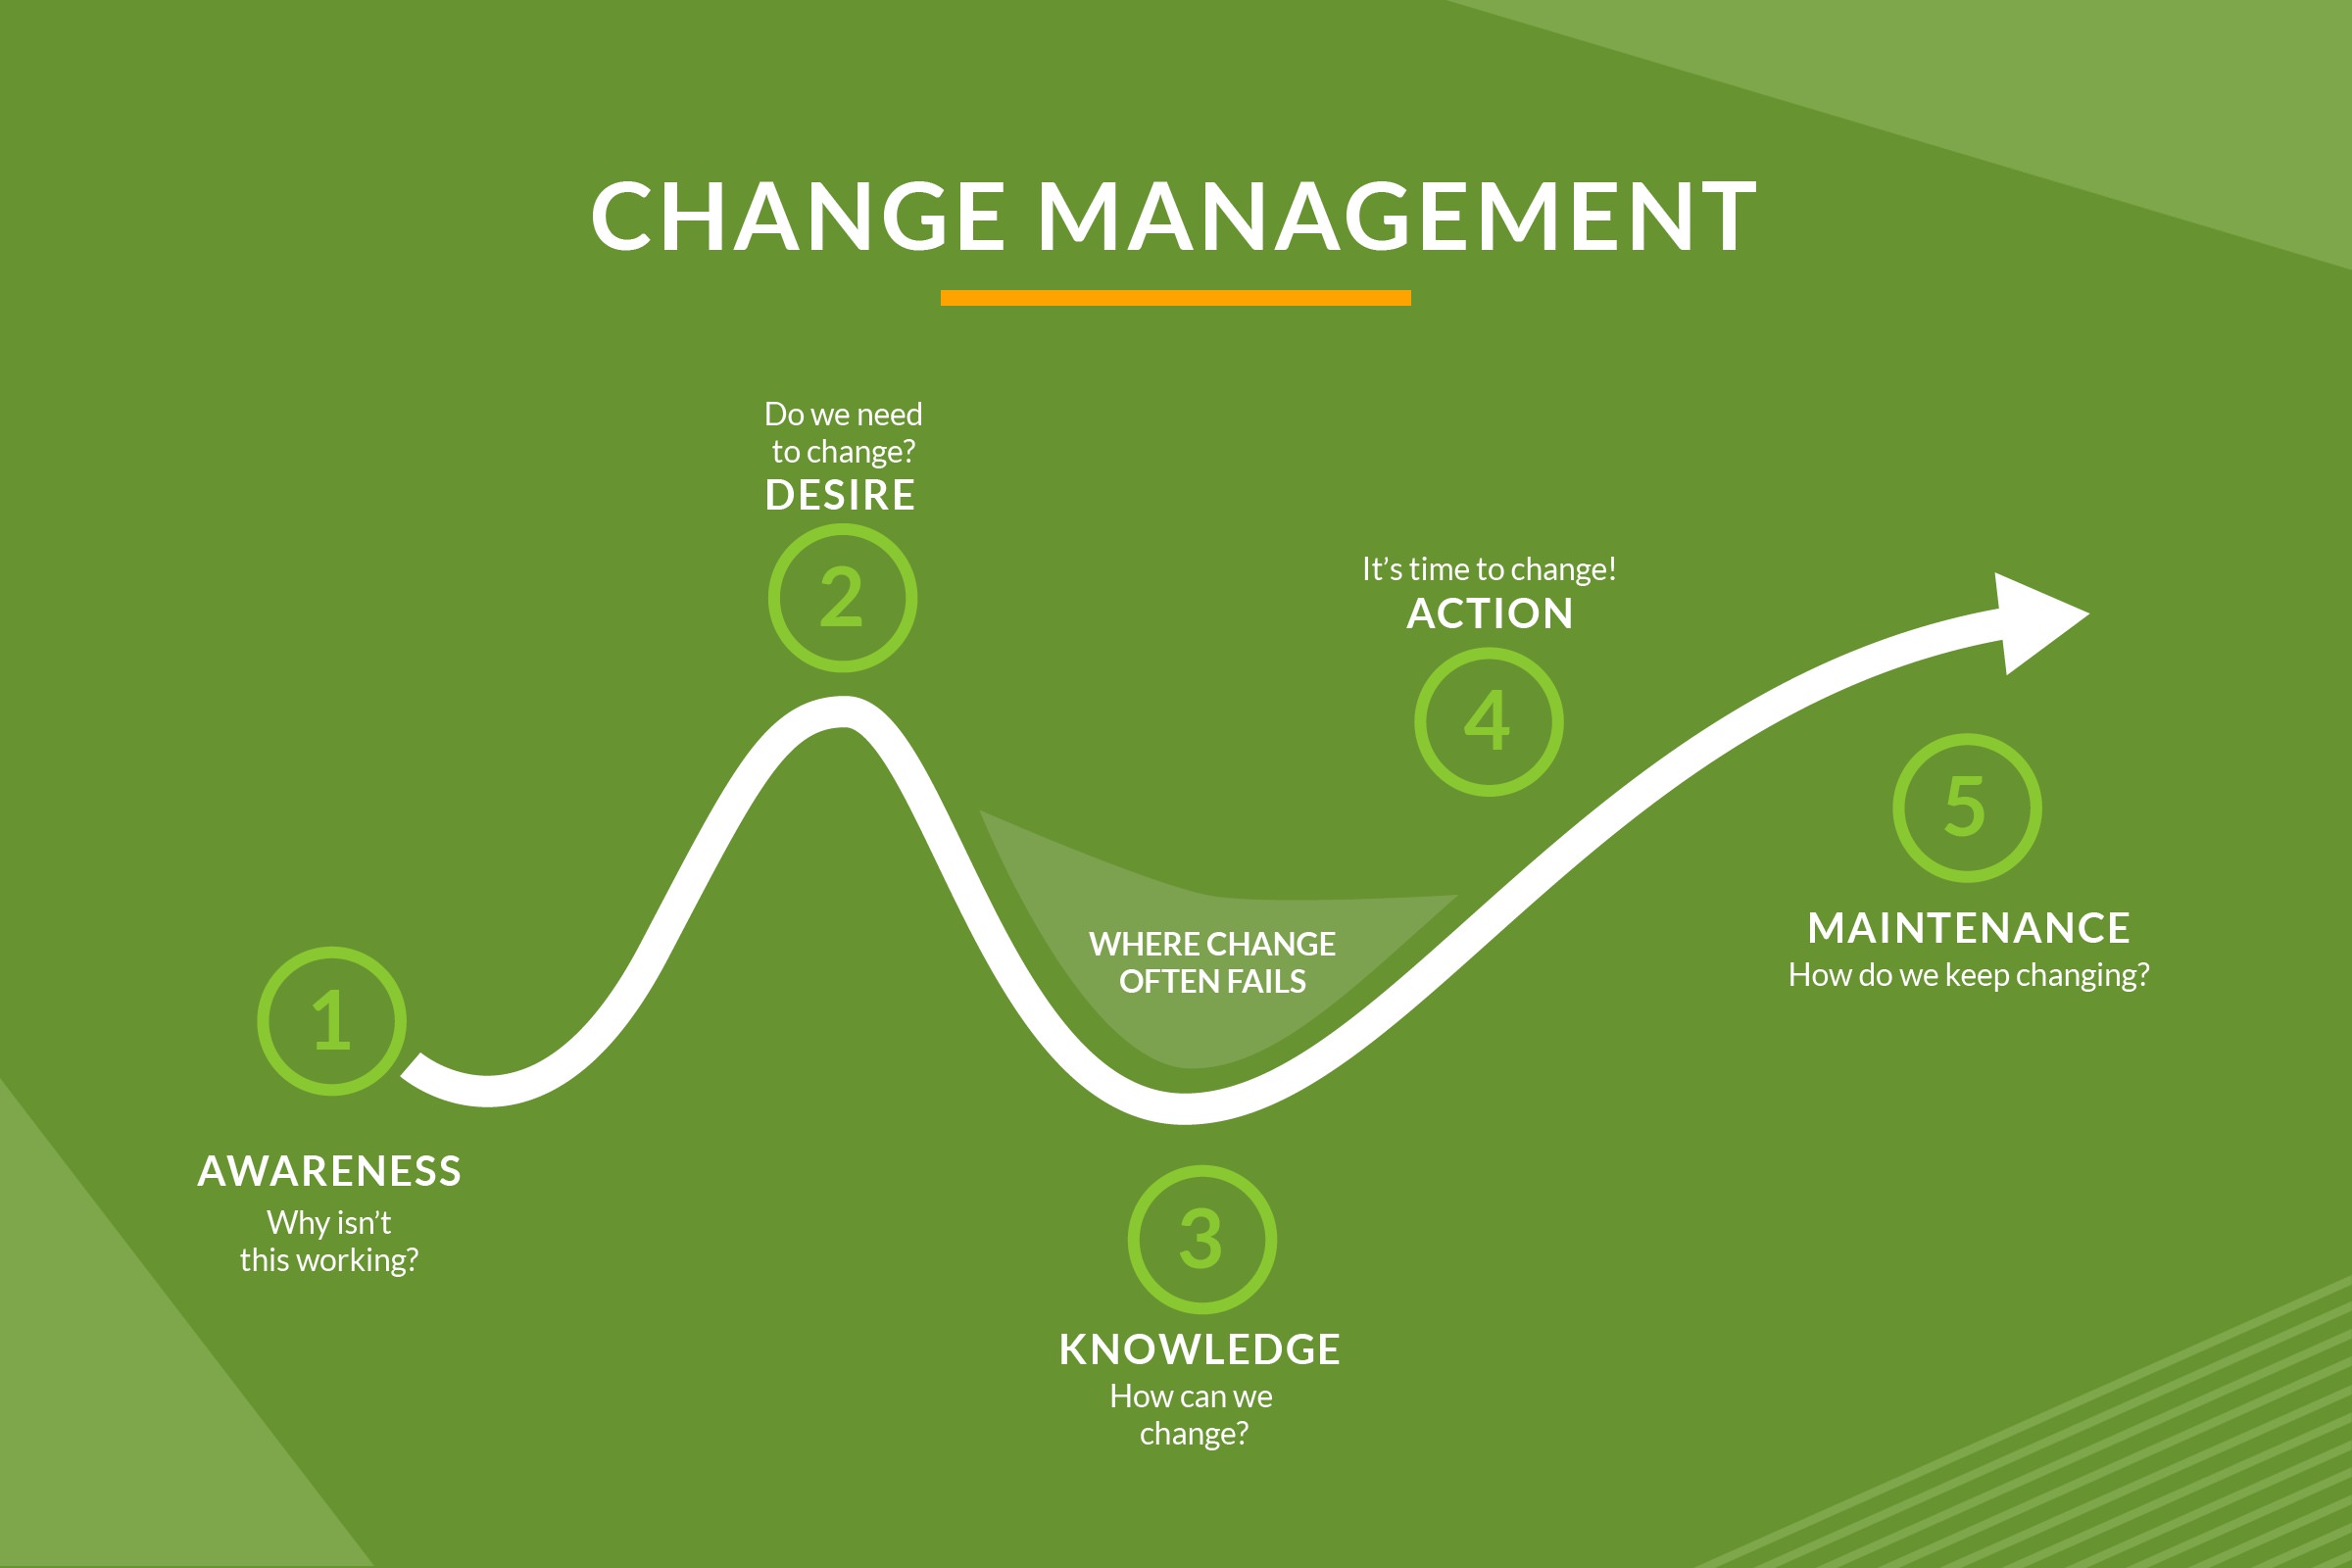 Change Management. A path is showing leading through five points, peaking at the second and fifth and lowest at the third. the first point is Awareness (why isn't this working?). The second is Desire (do we need to change?). The third is Knowledge (how can we change?). The fourth is Action (it's time to change!). The fifth and last is Maintenance (How do we keep changing?). An area between the second, third, and fourth is marked 